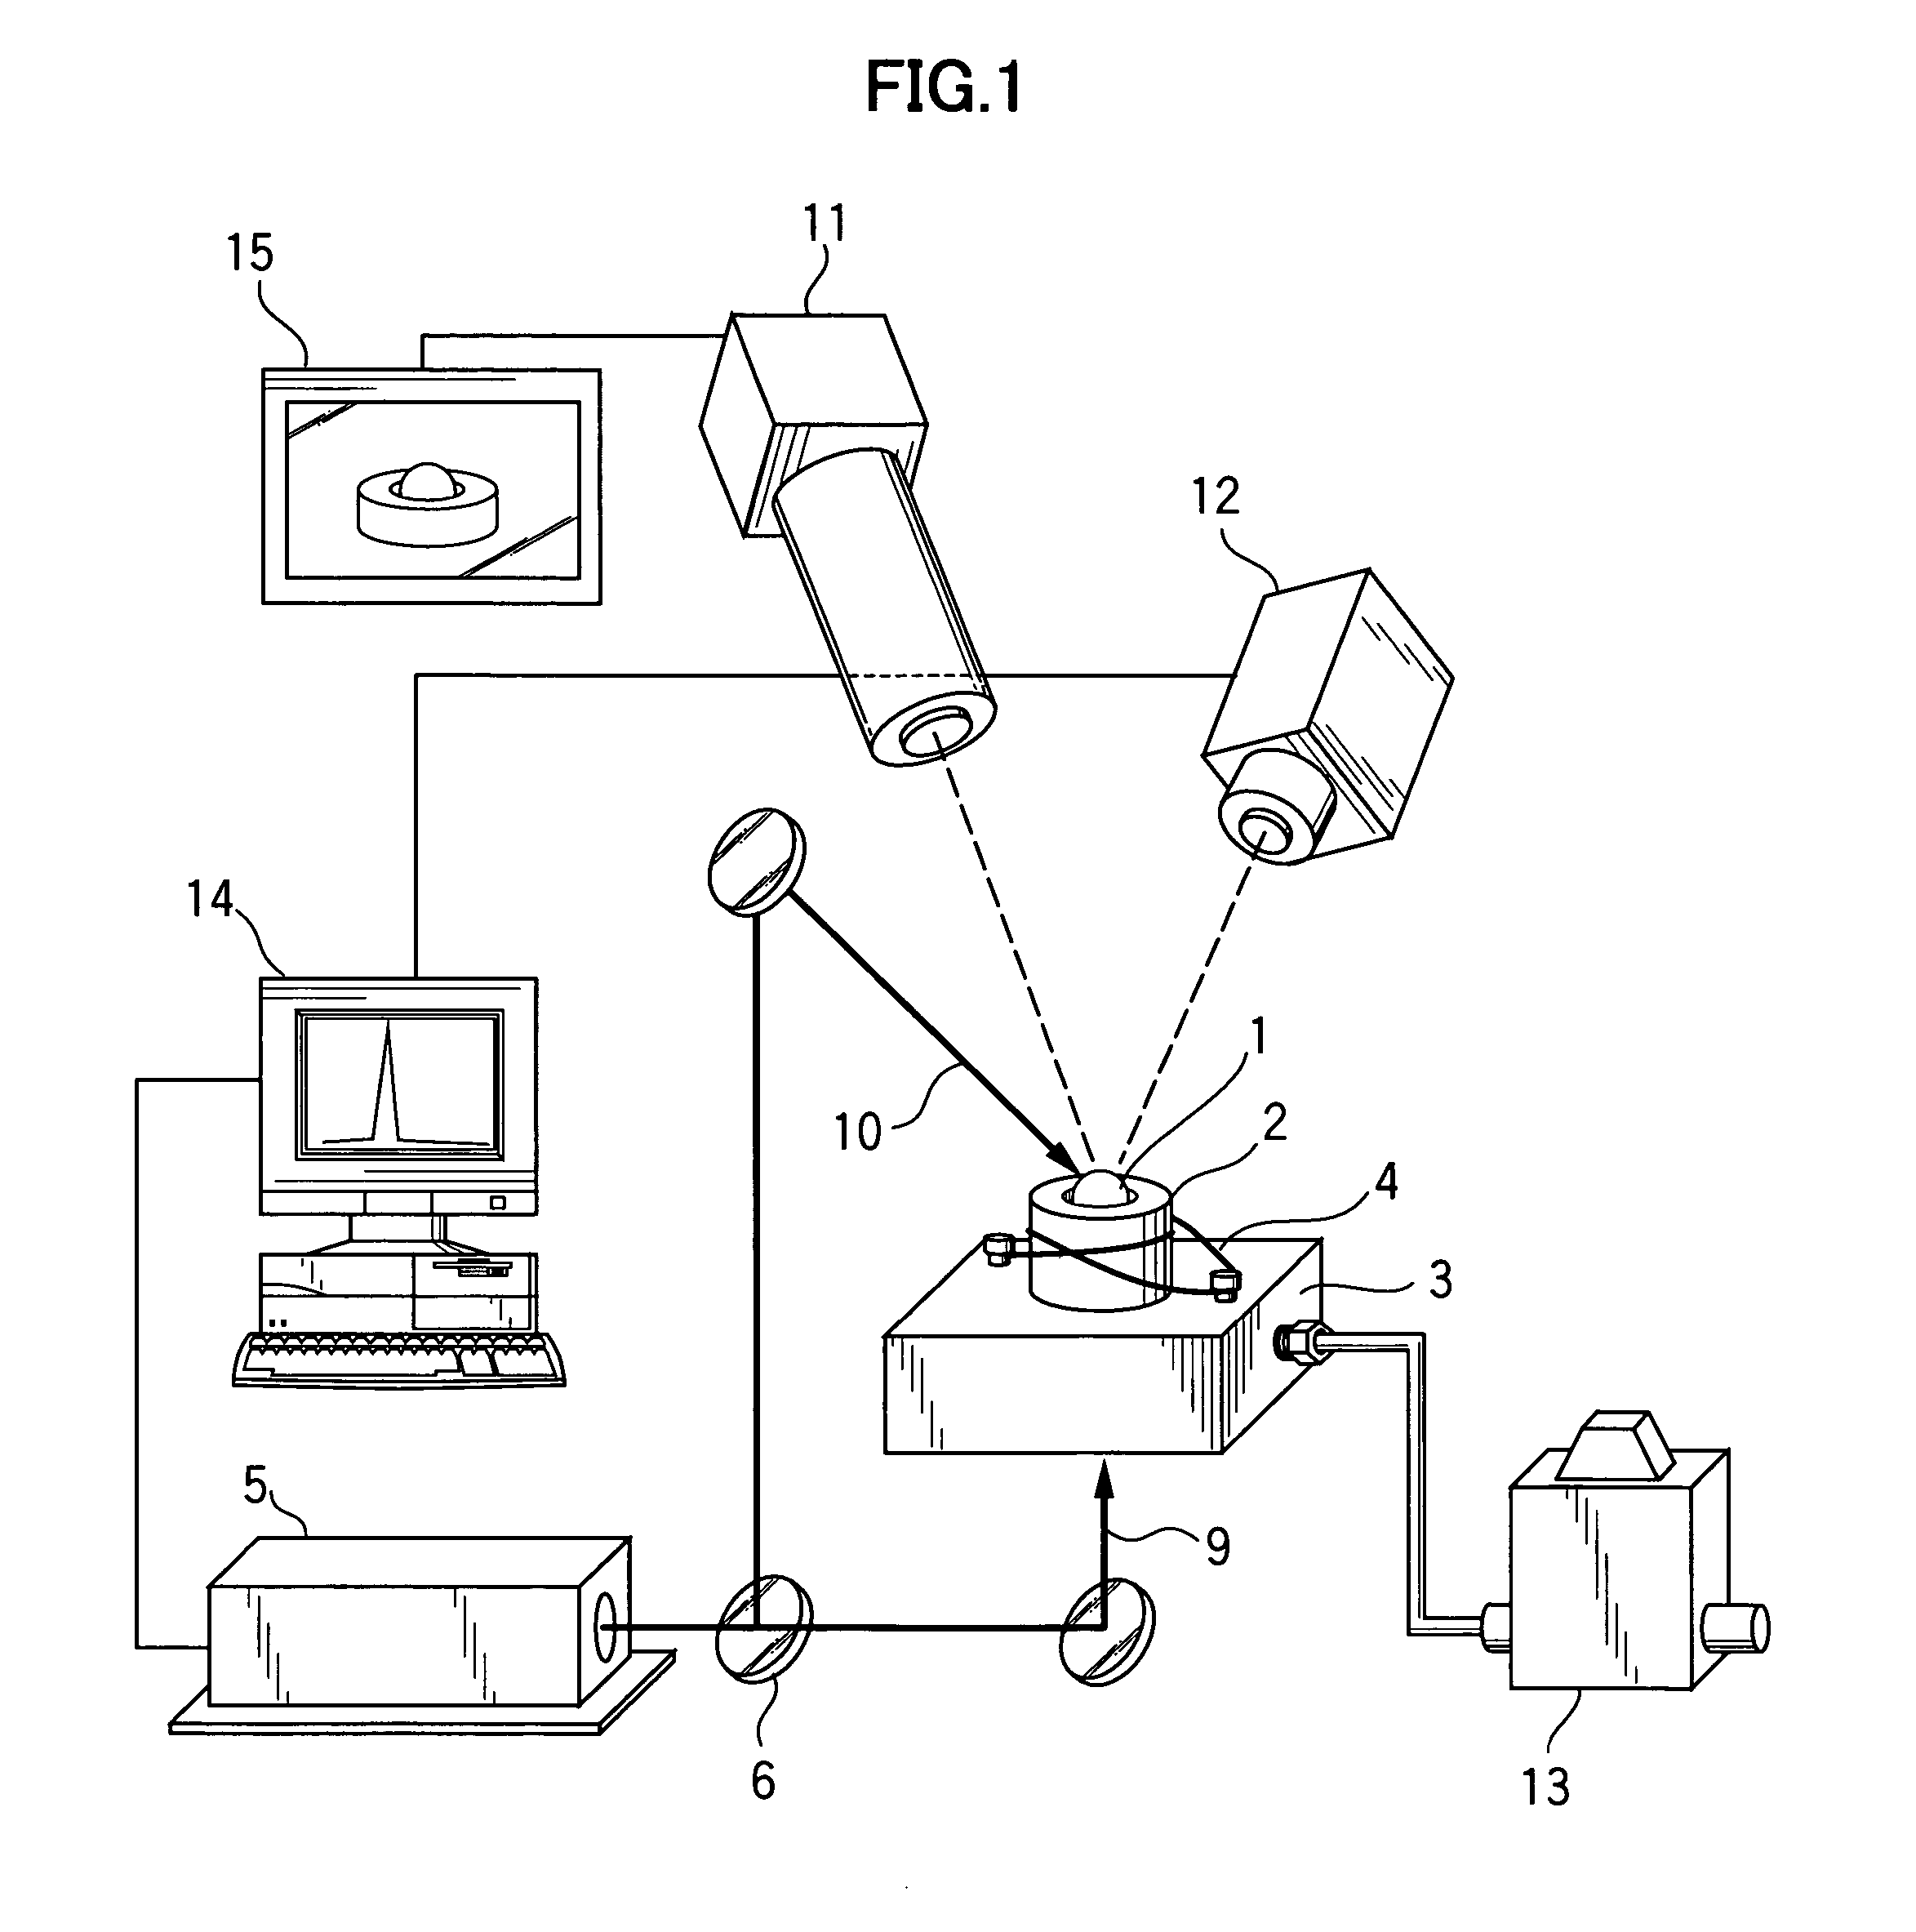 Method of producing barium-titanium-based oxide glass using containerless solidification process